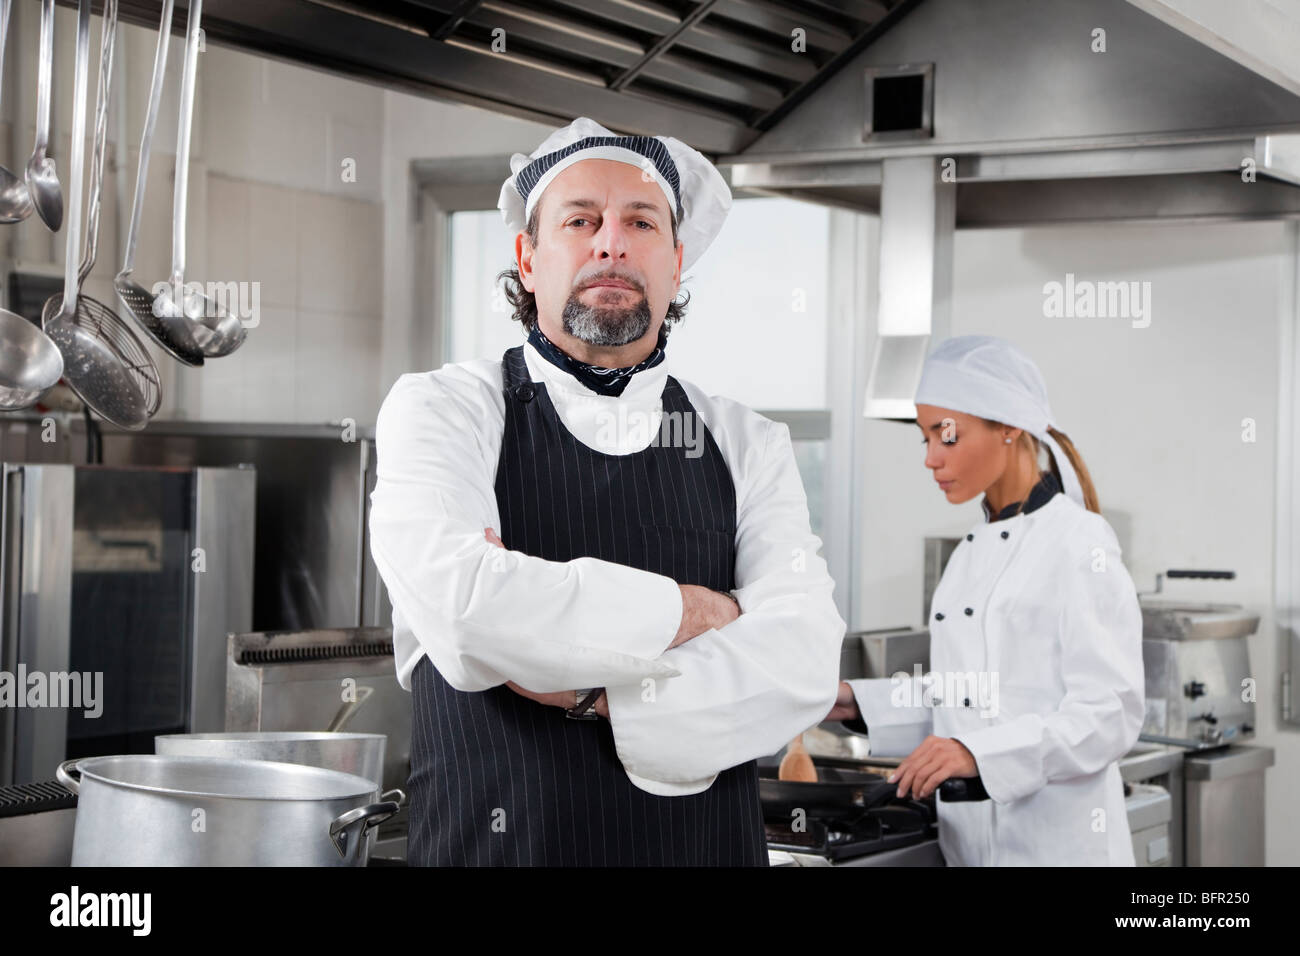 portrait of confident chef looking at camera in kitchen Stock Photo